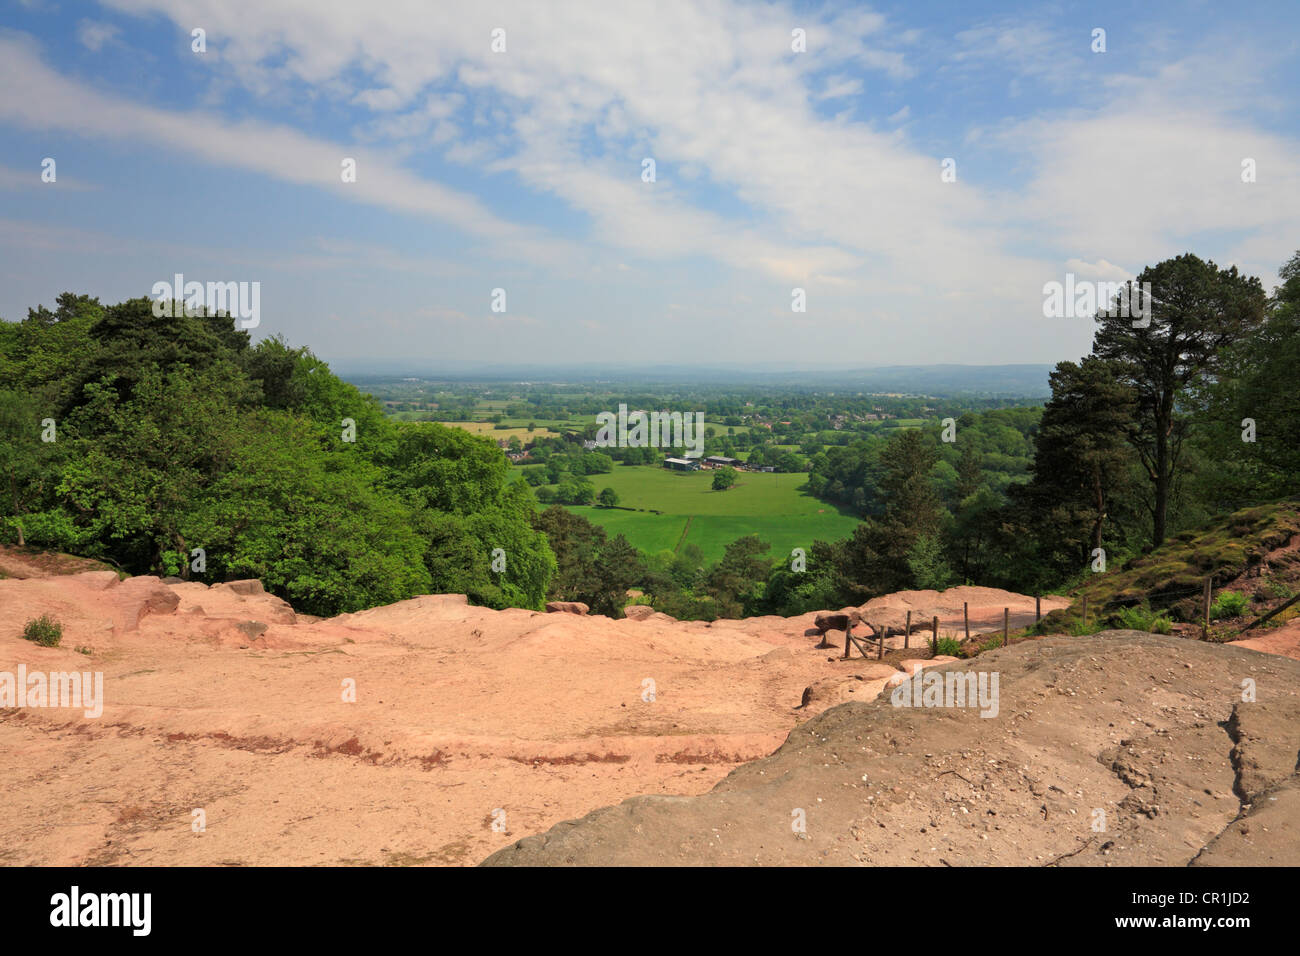 Looking across the Cheshire Plain from Stormy Point on Alderley Edge, Cheshire, England, UK. Stock Photo